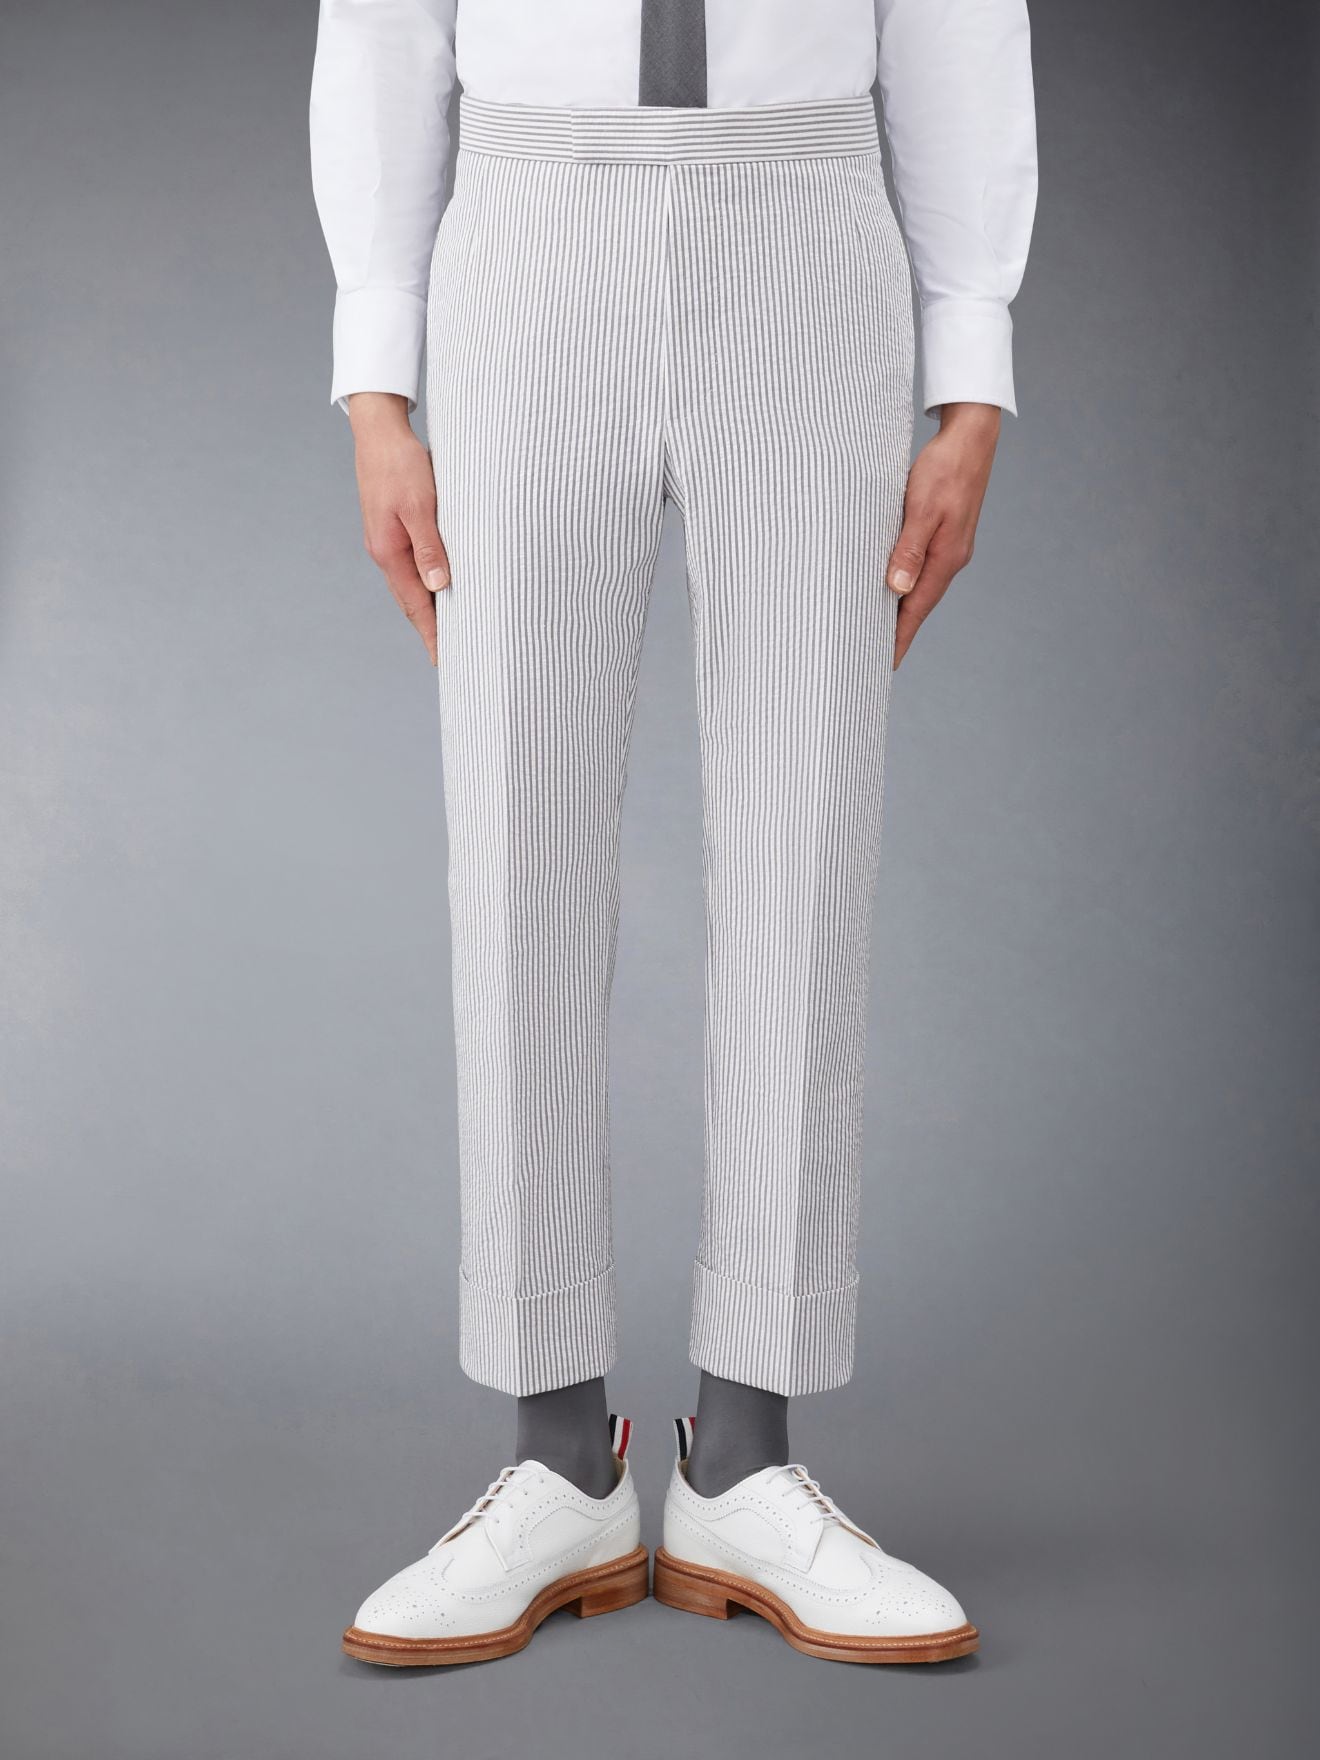 CLASSIC BACKSTRAP TROUSER WITH HALF LINING IN SEERSUCKER | Thom Browne ...